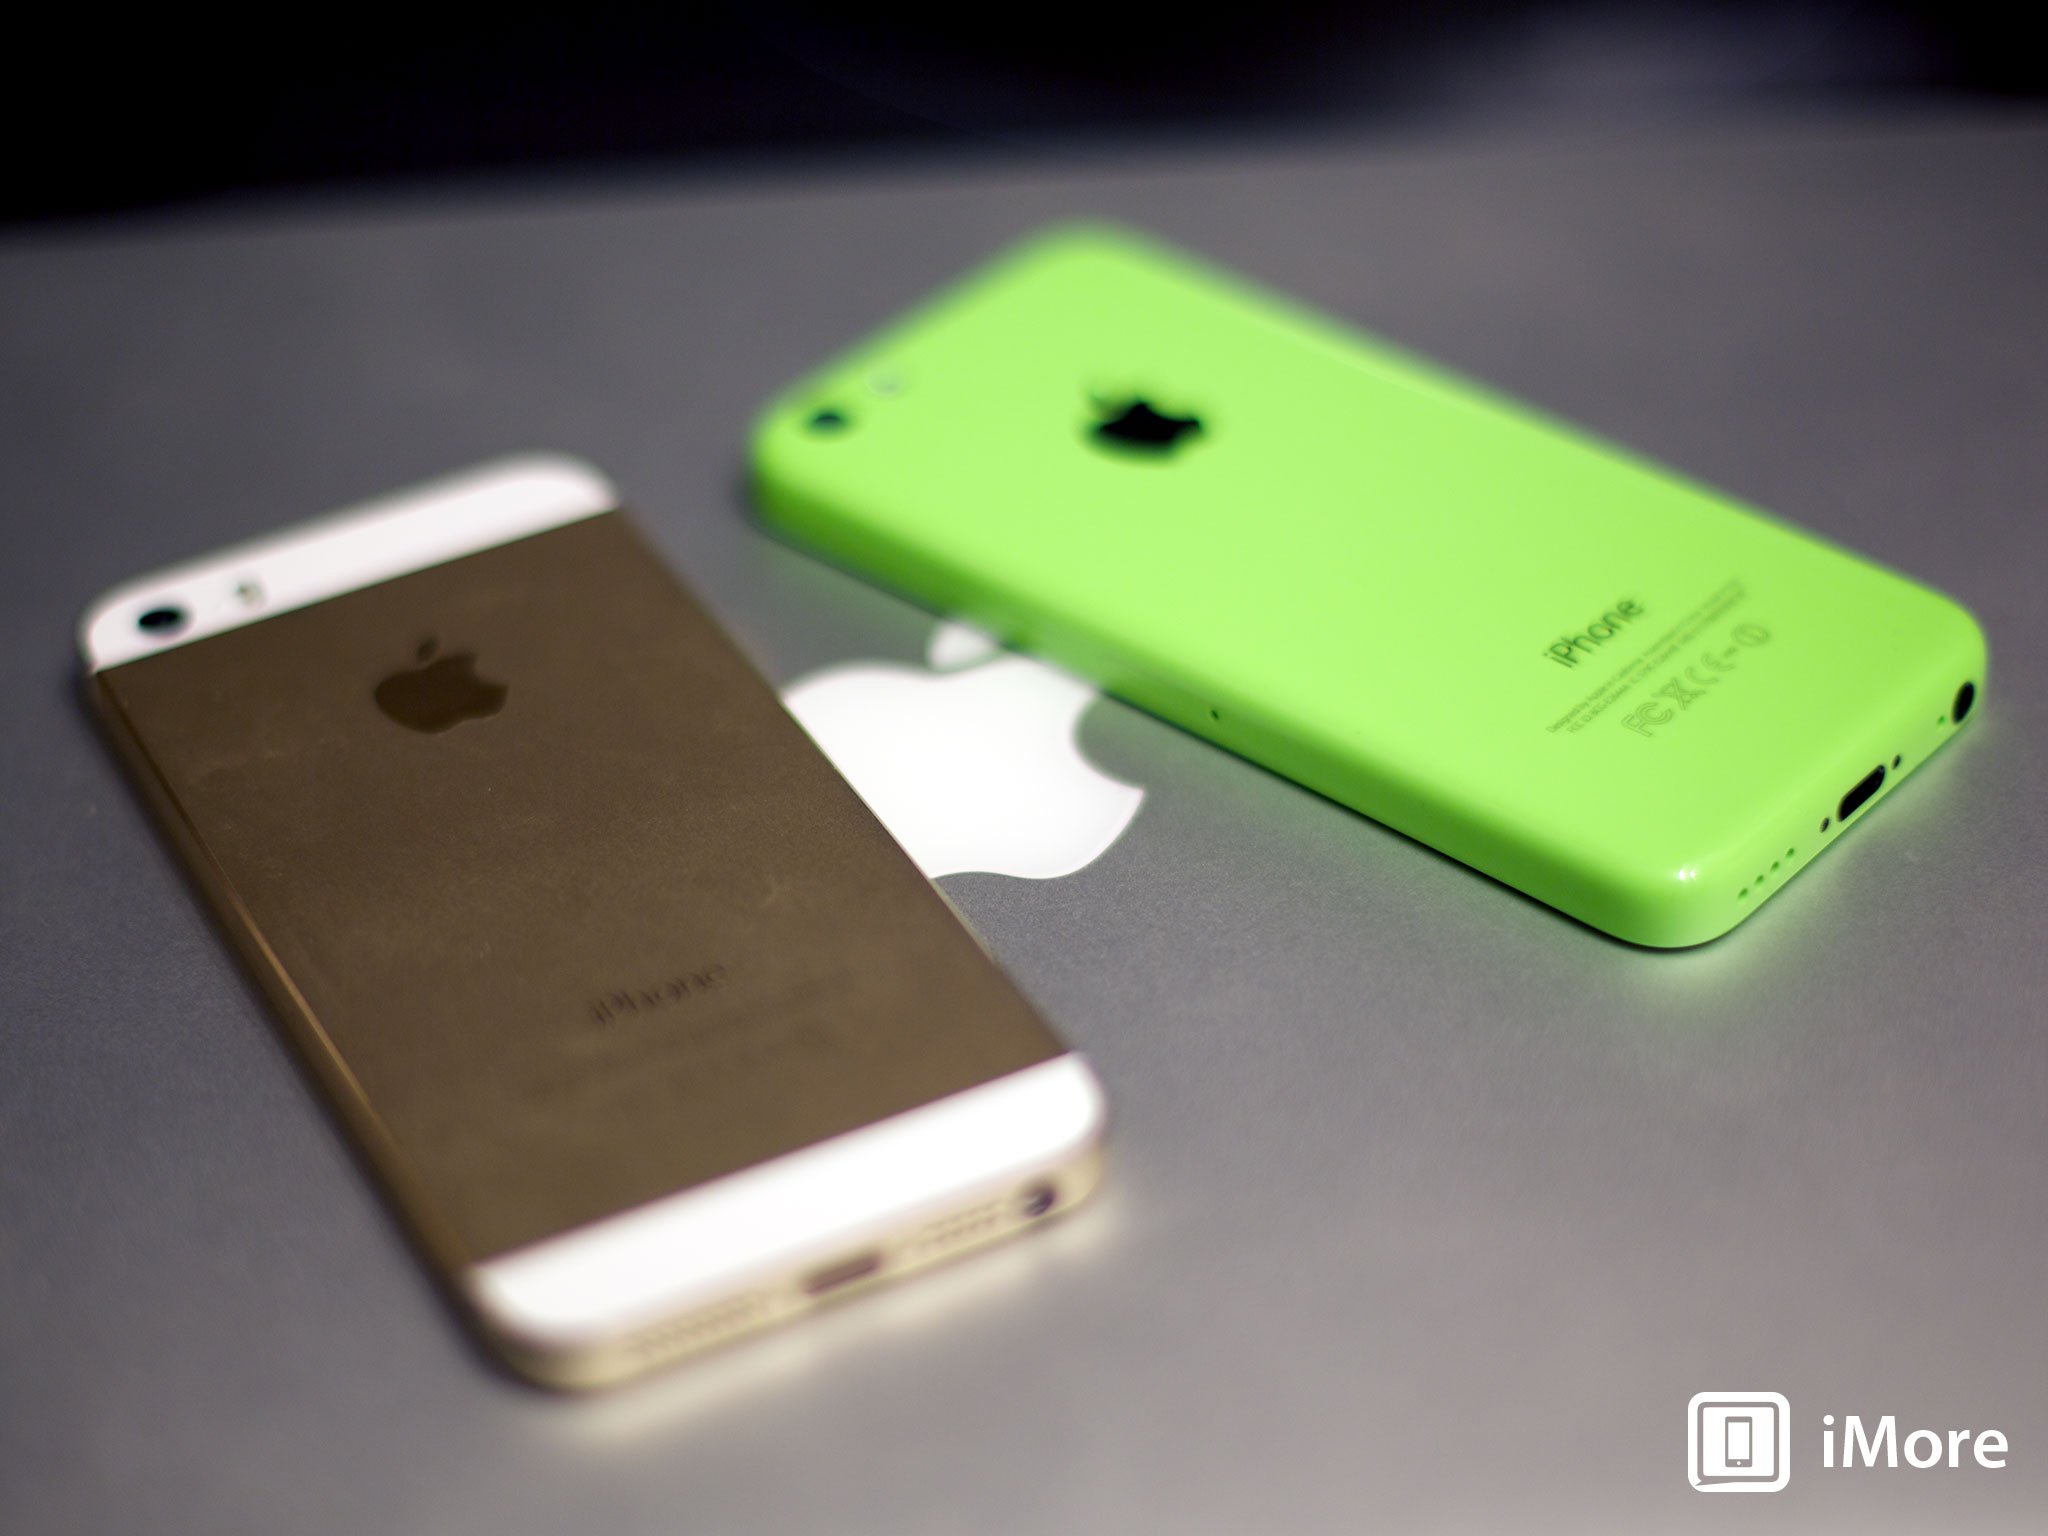 iPhone 5s and iPhone 5c round table review: One month later